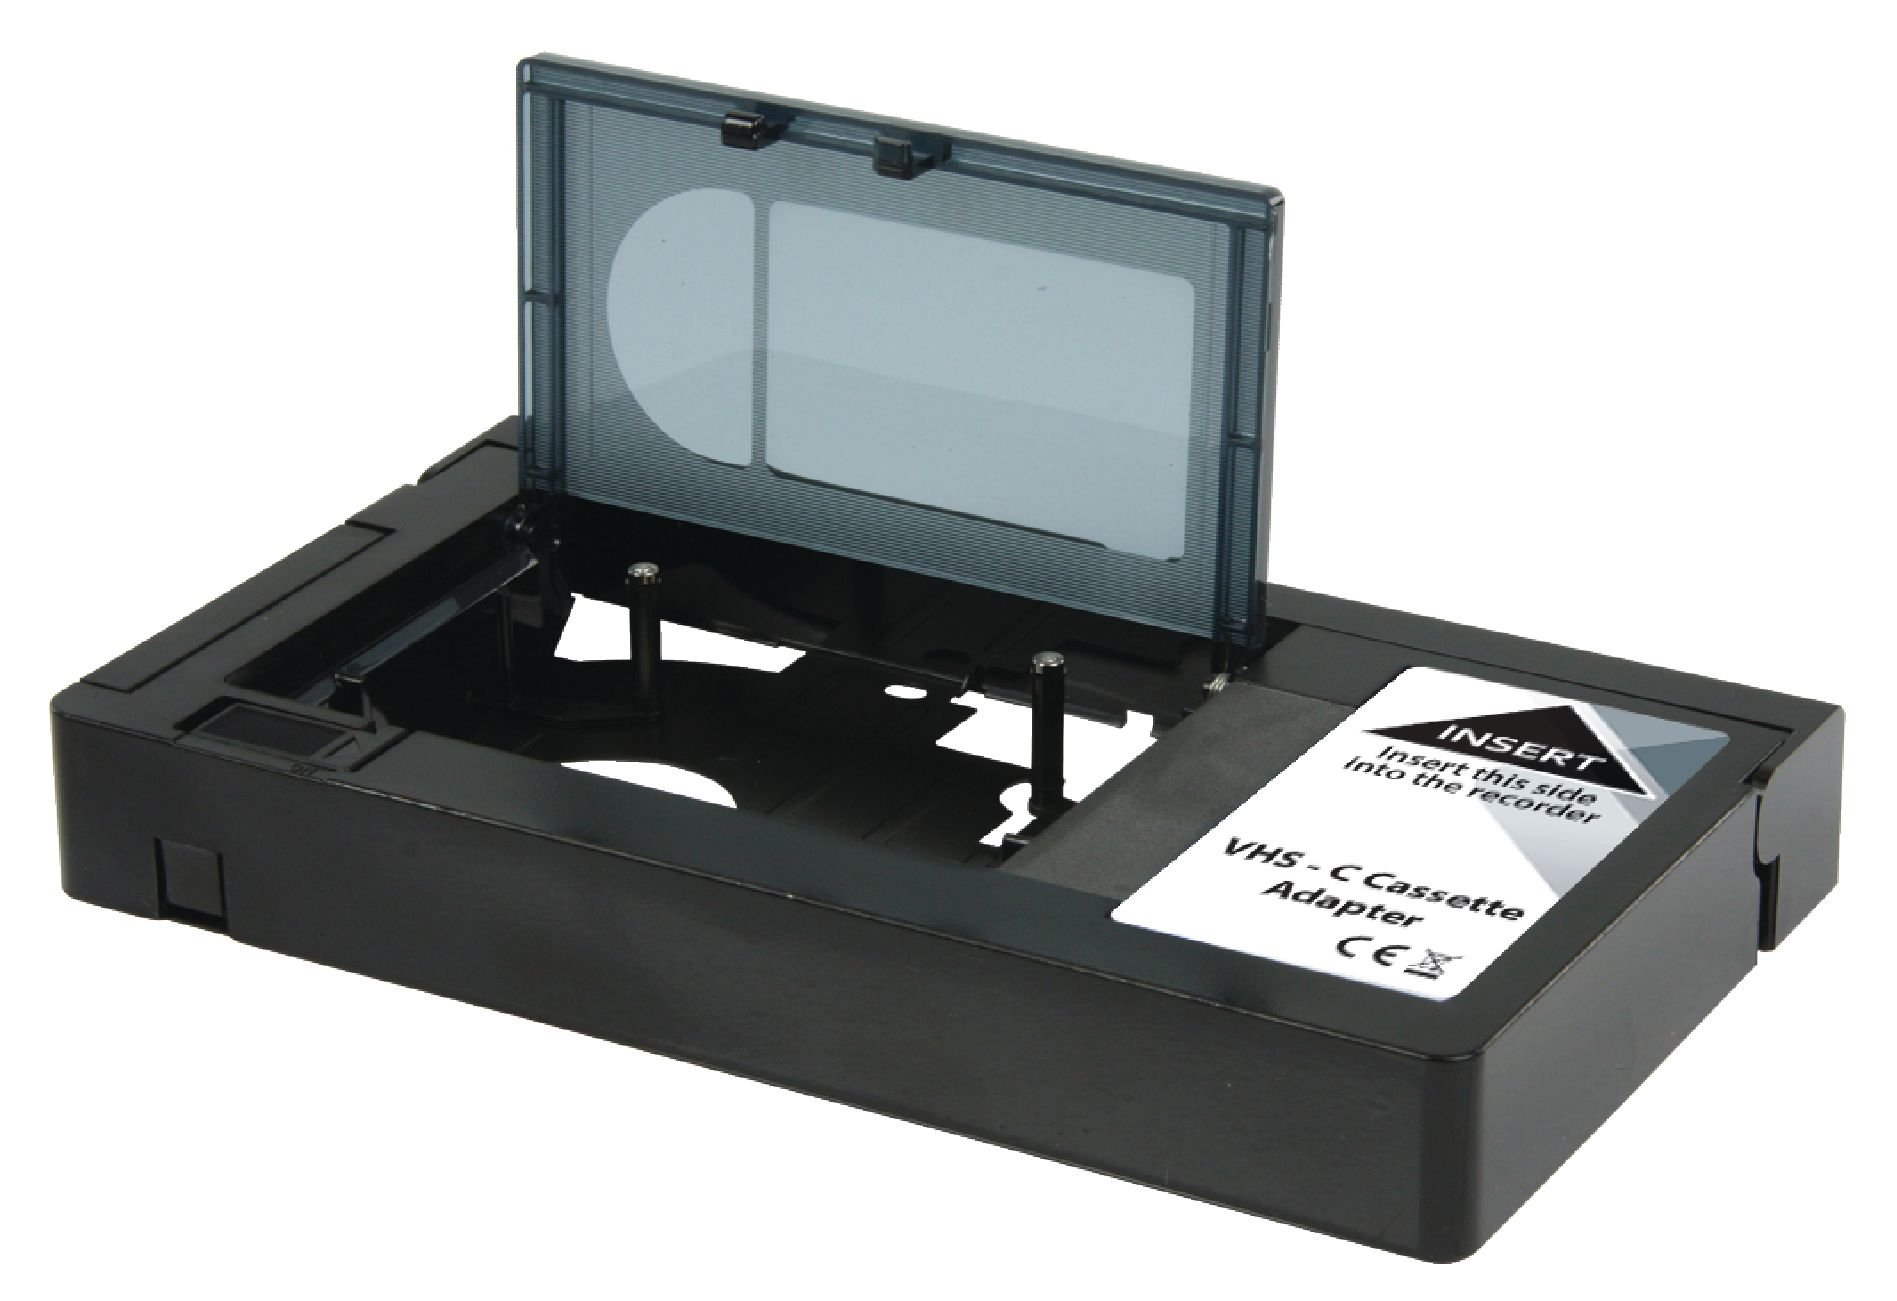 vhs tape adapter for vhs-c tapes